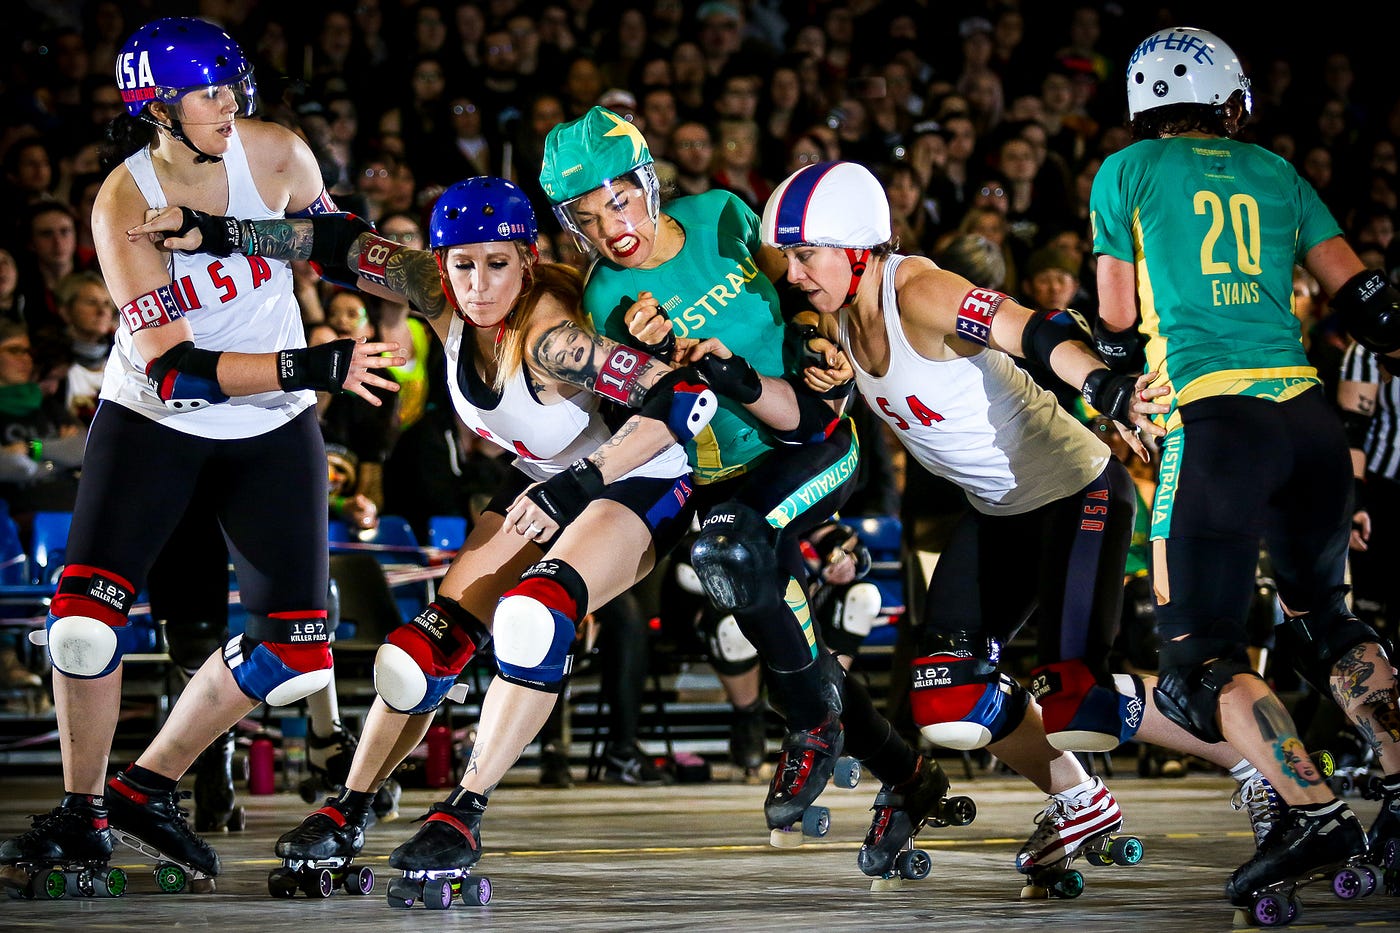 The Best Roller Derby World Cup Photos | by Frogmouth | Medium